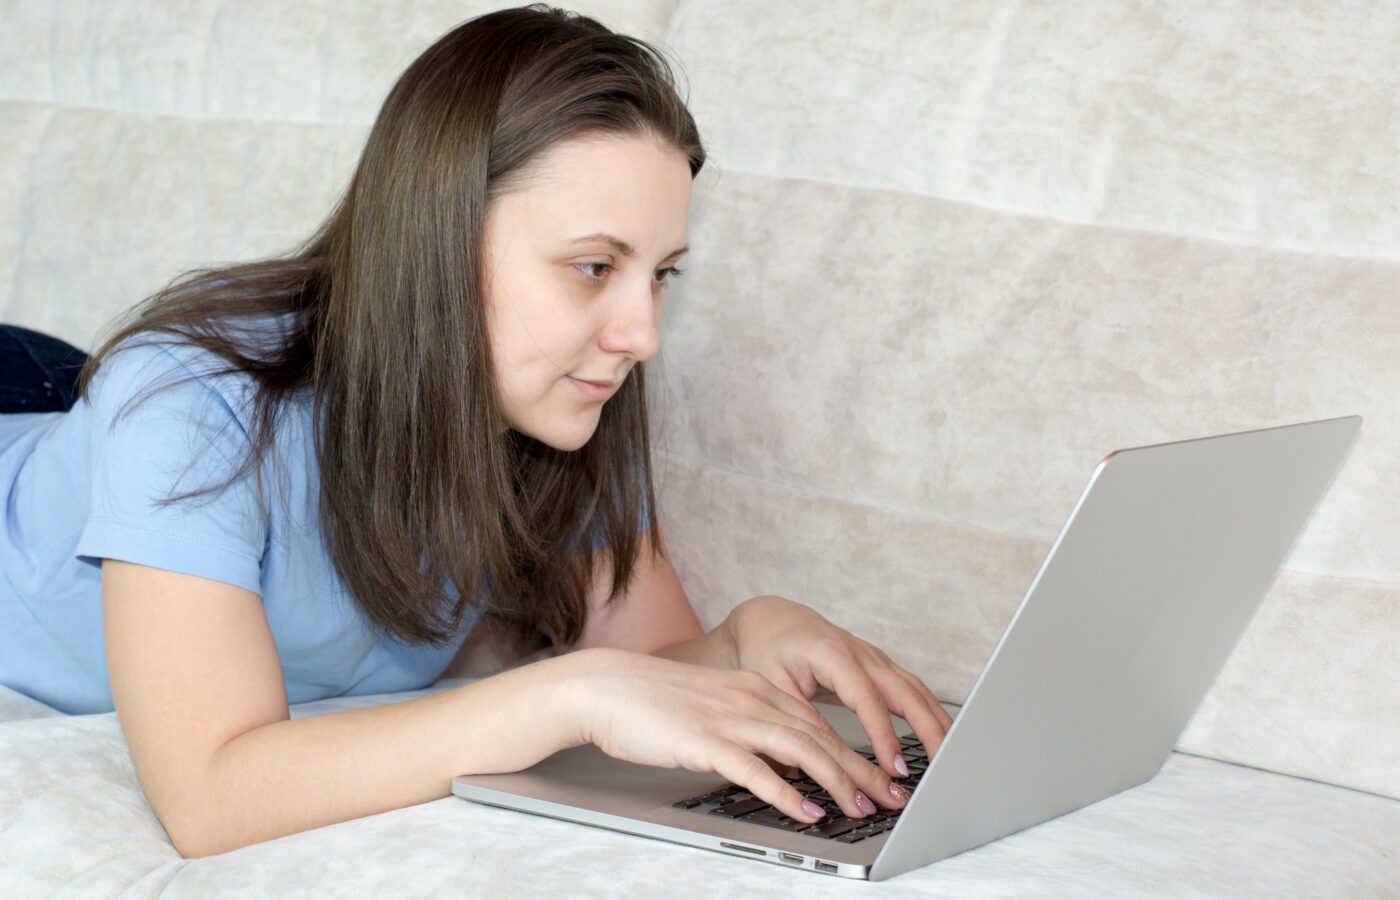 Do you pay VAT on eBay fees - lady in a blue tshirt working on a laptop lying on a bed